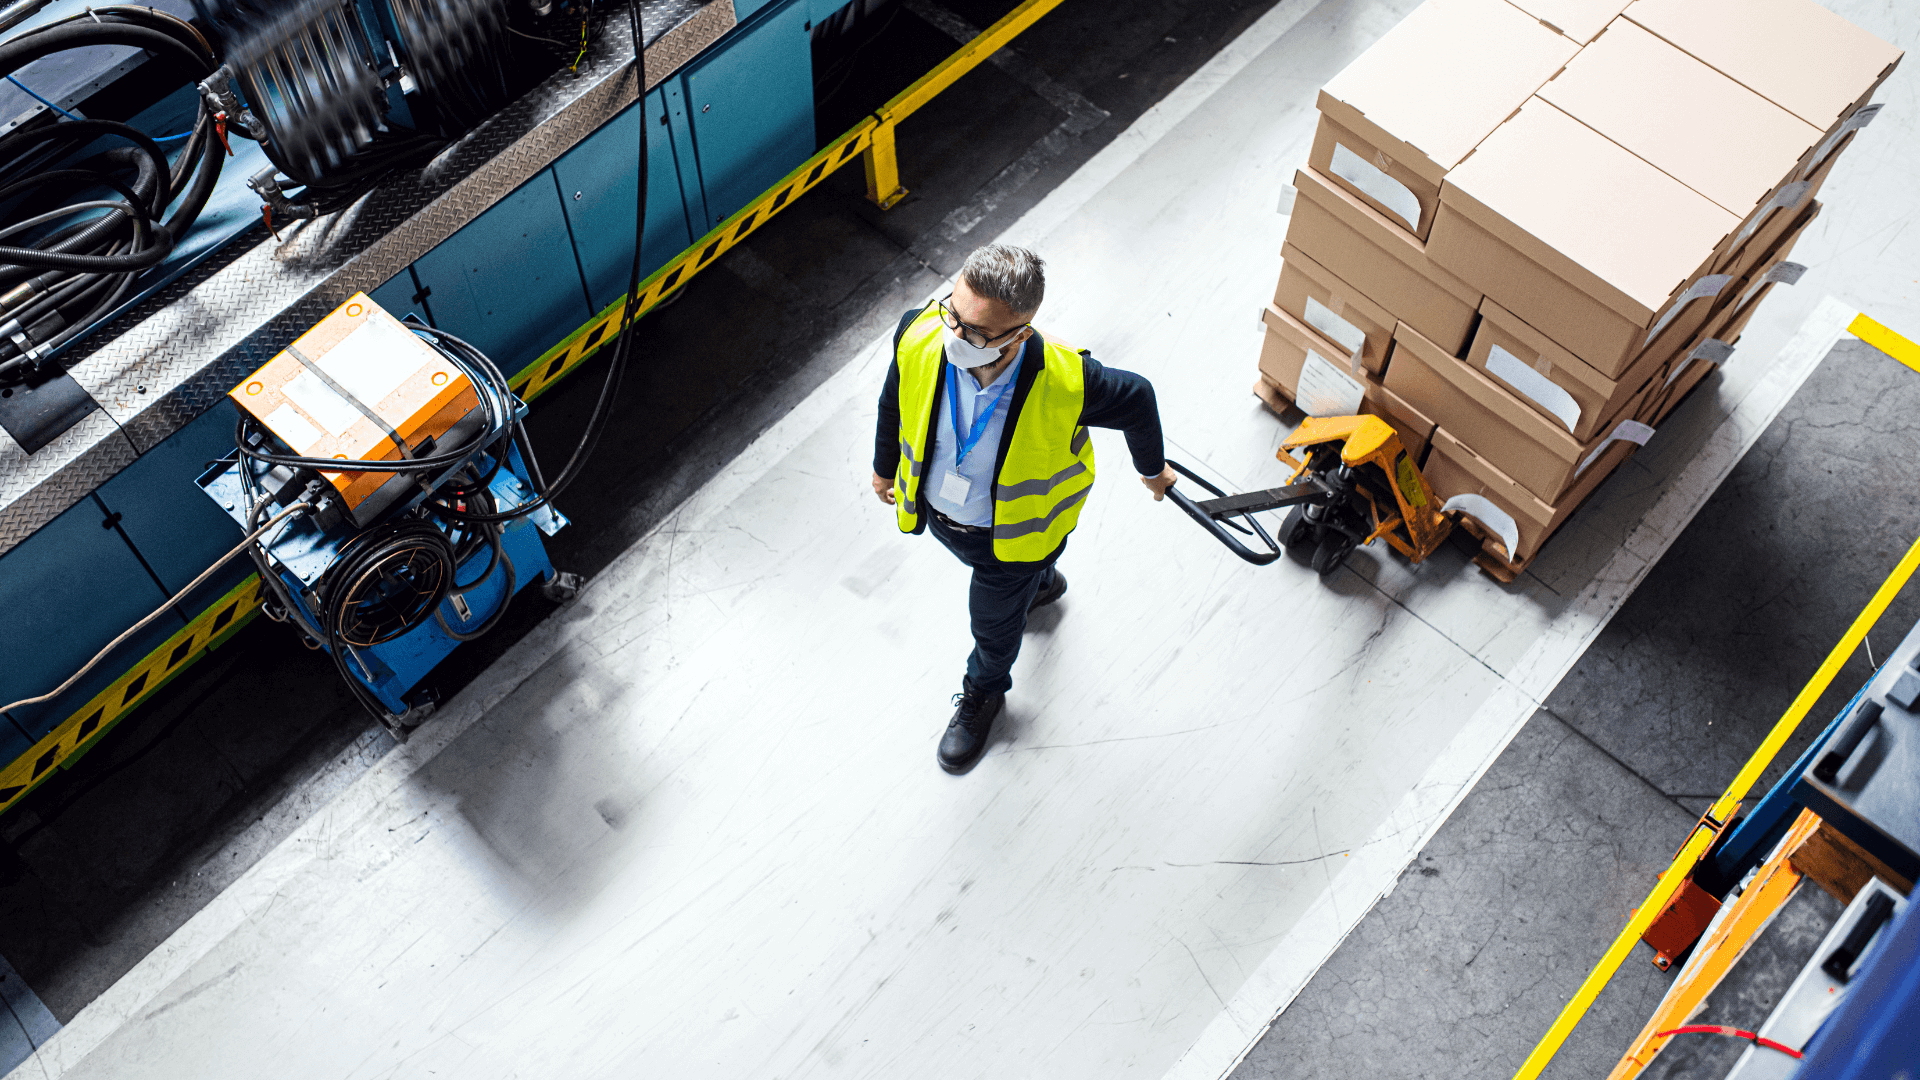 How Do Warehouses Work in a 3pl Company?